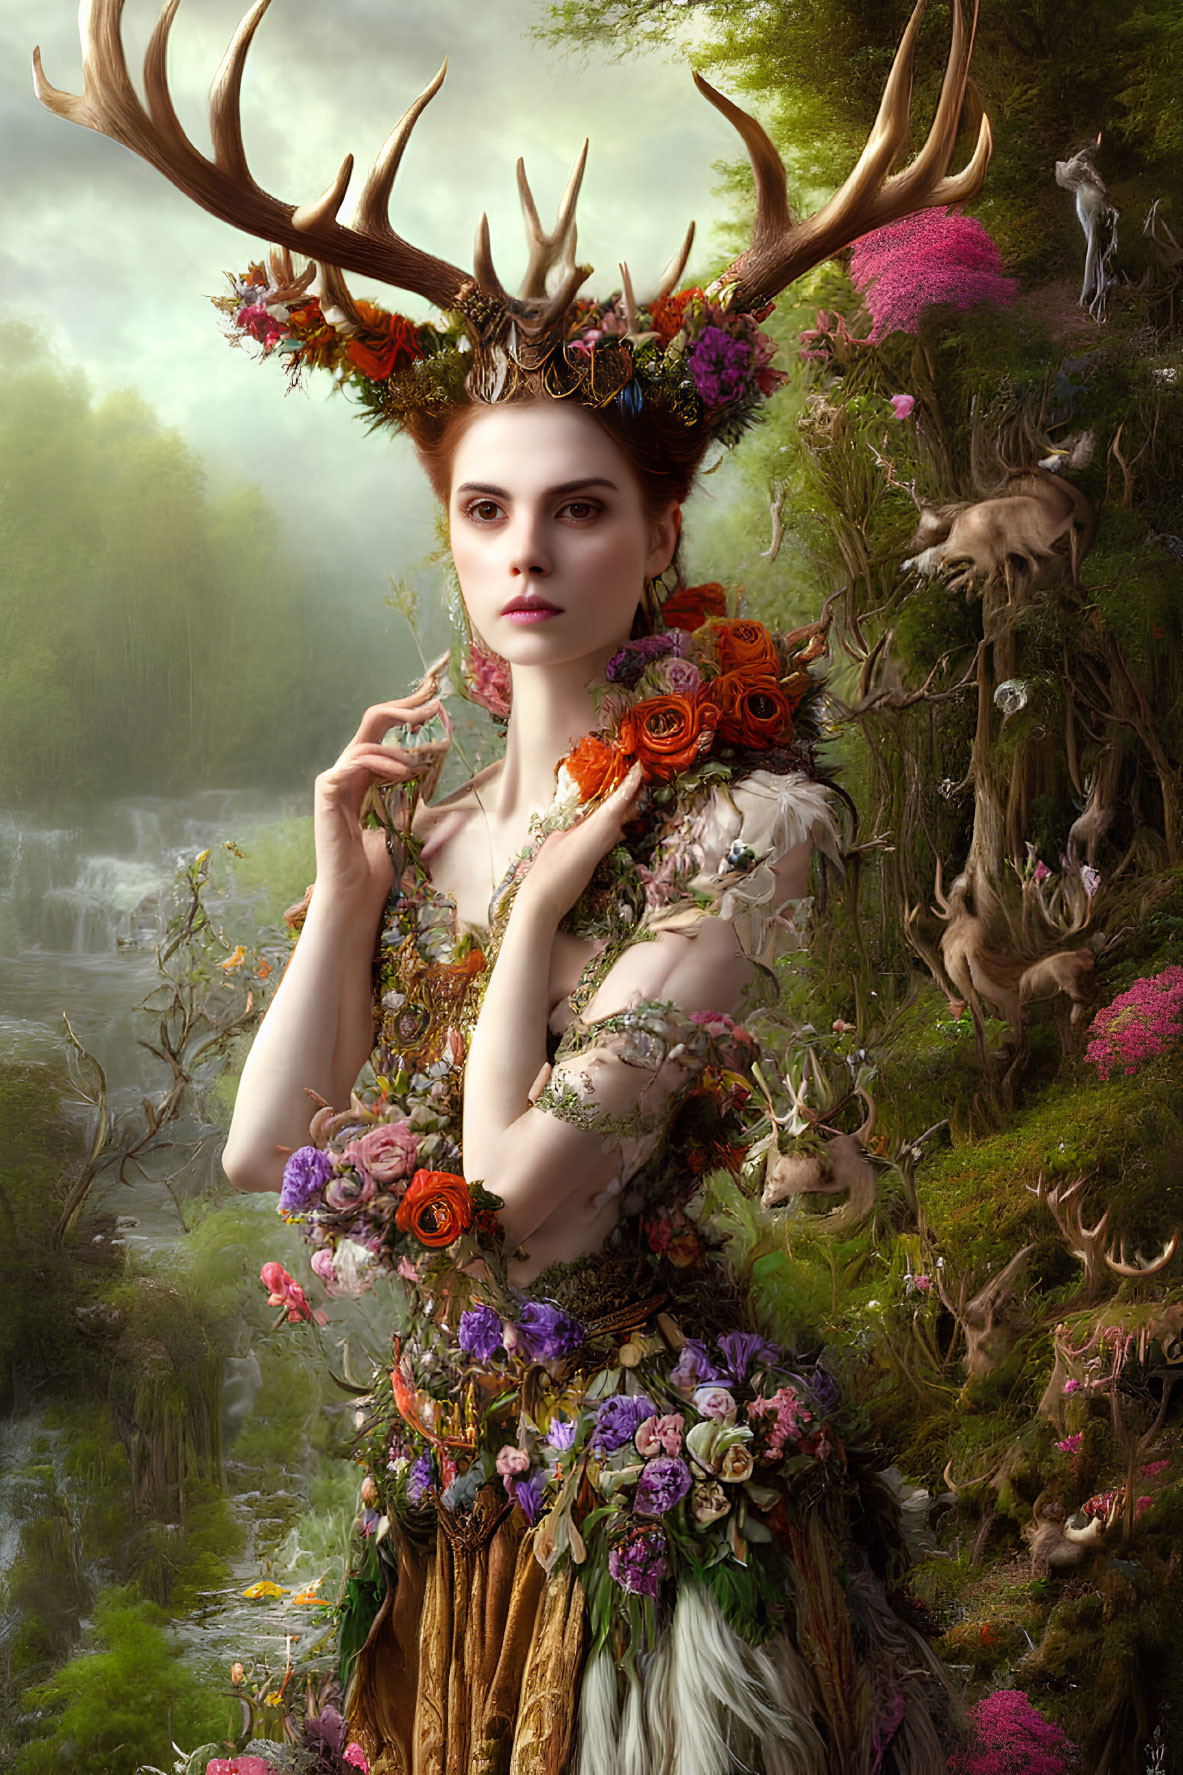 Woman with antlers and floral crown in mystical forest scene